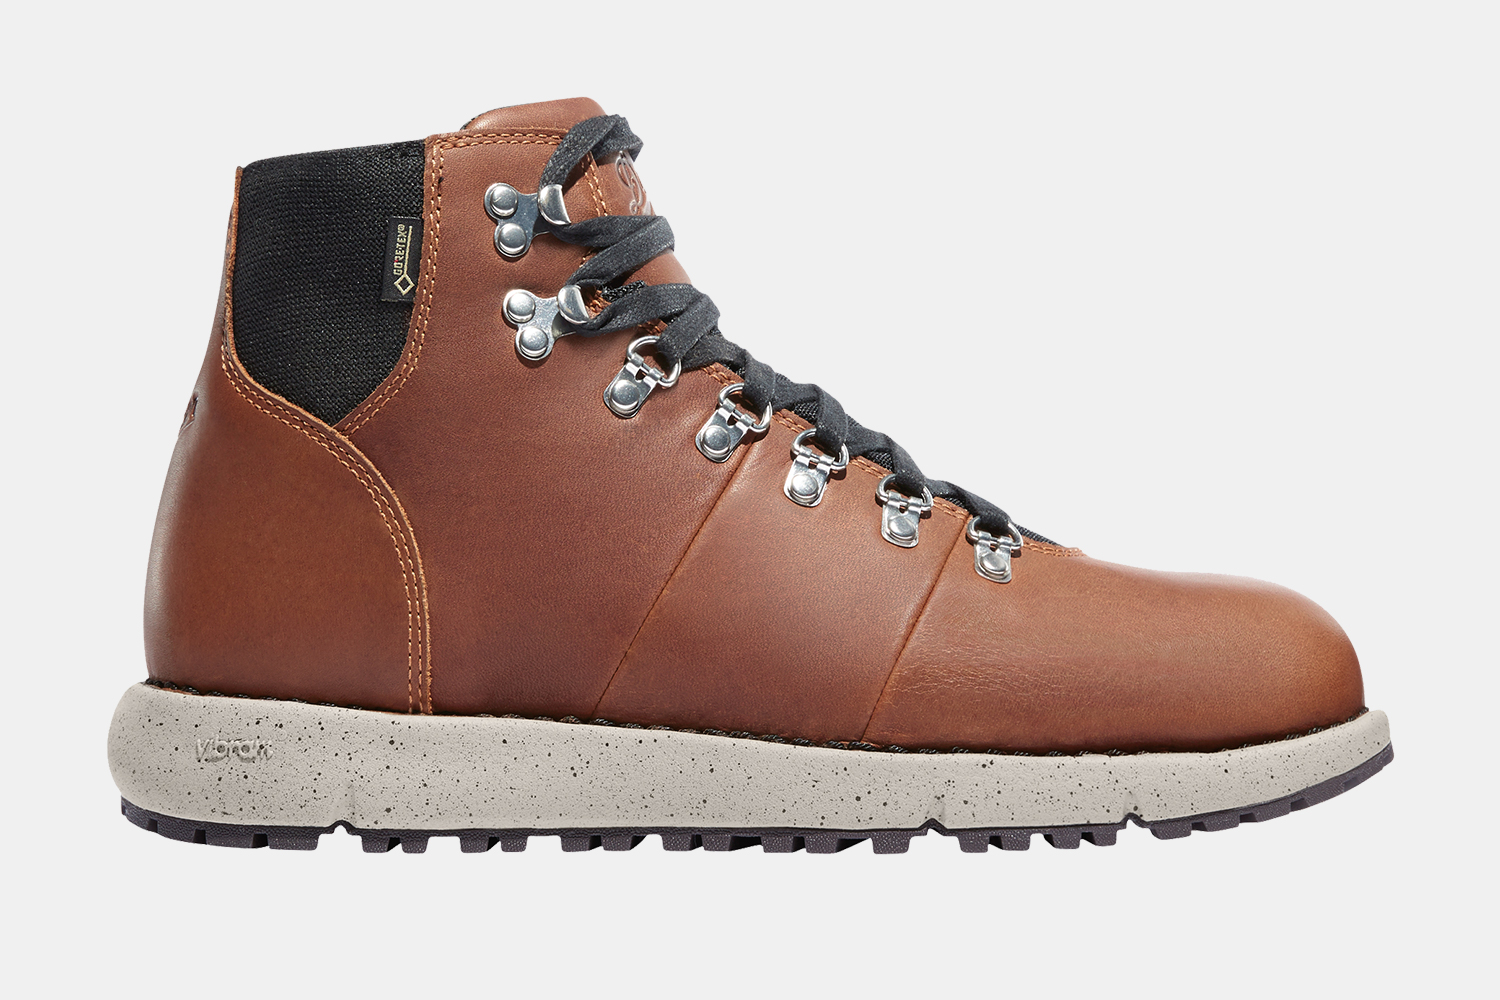 Danner Men's Hiking Boots Are on Sale at Huckberry - InsideHook